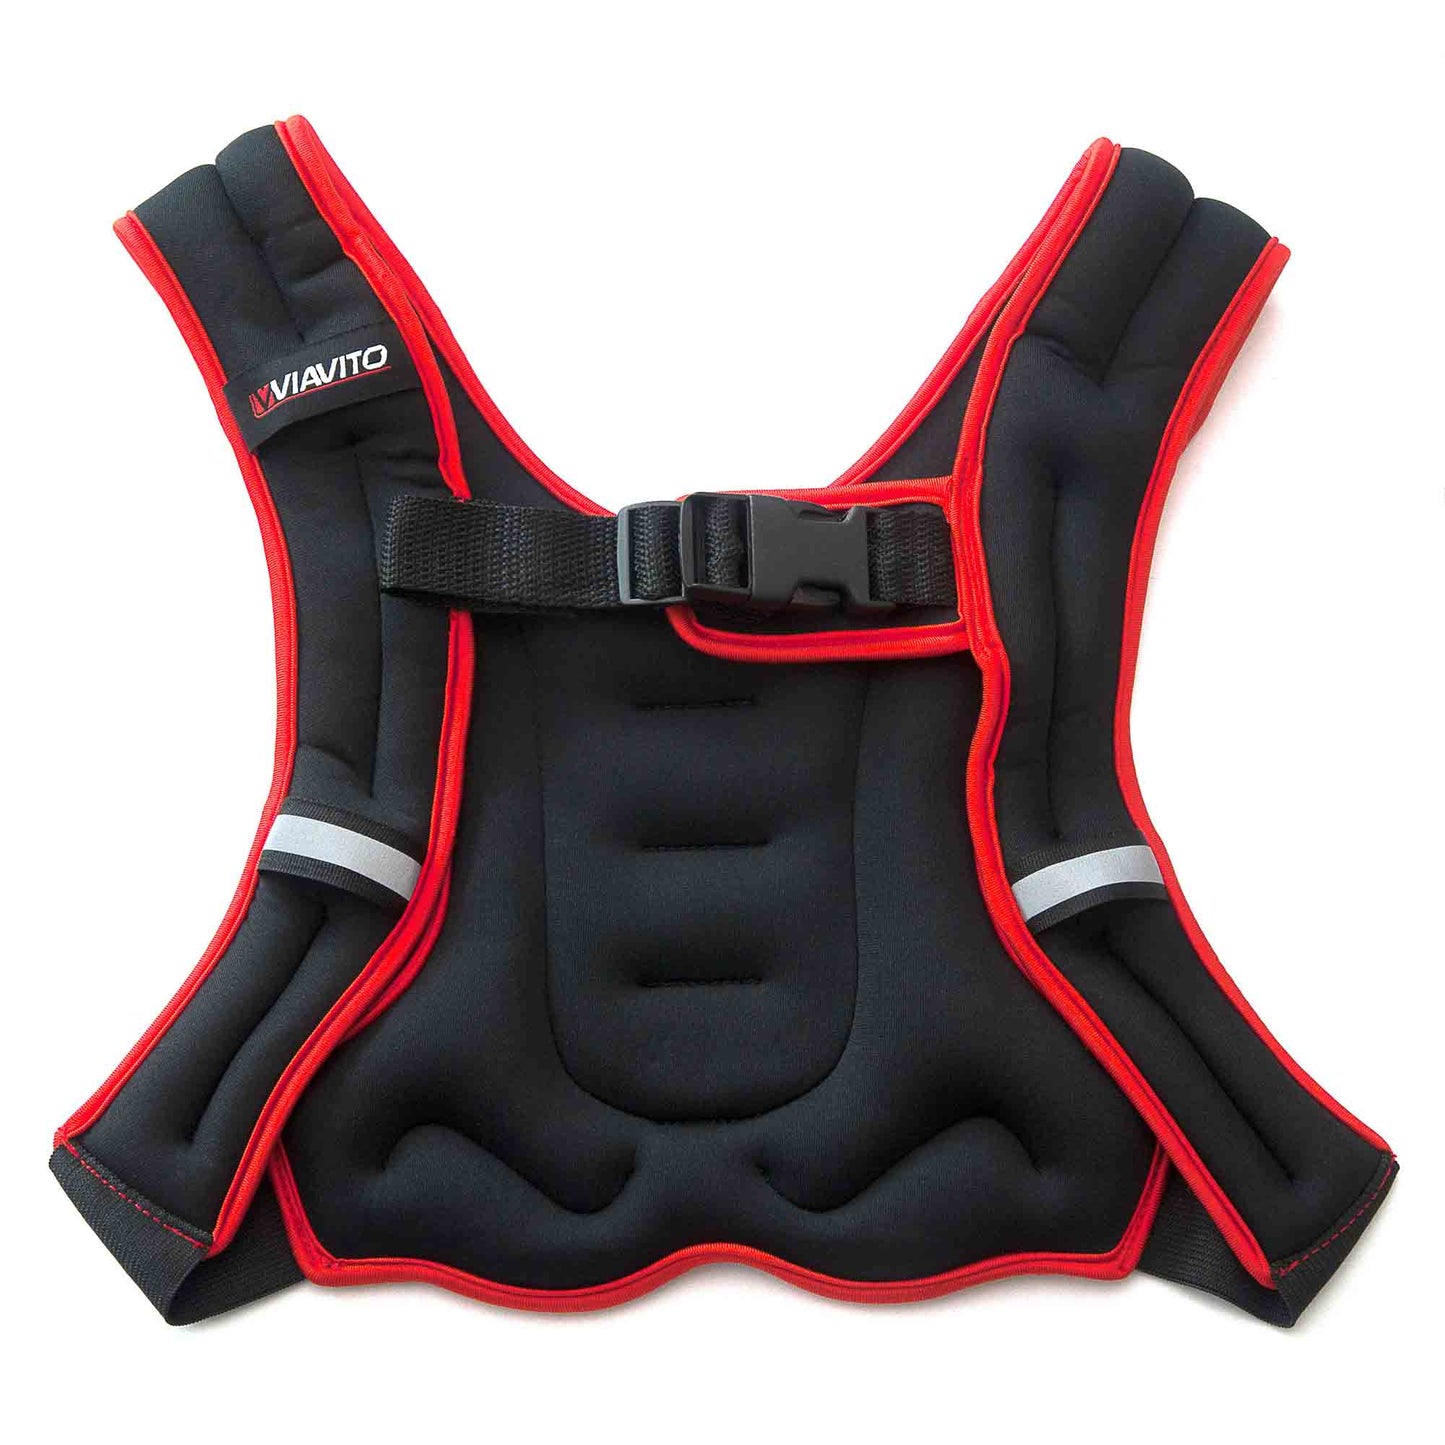 |Viavito 2.5kg Weighted Vest - Front|